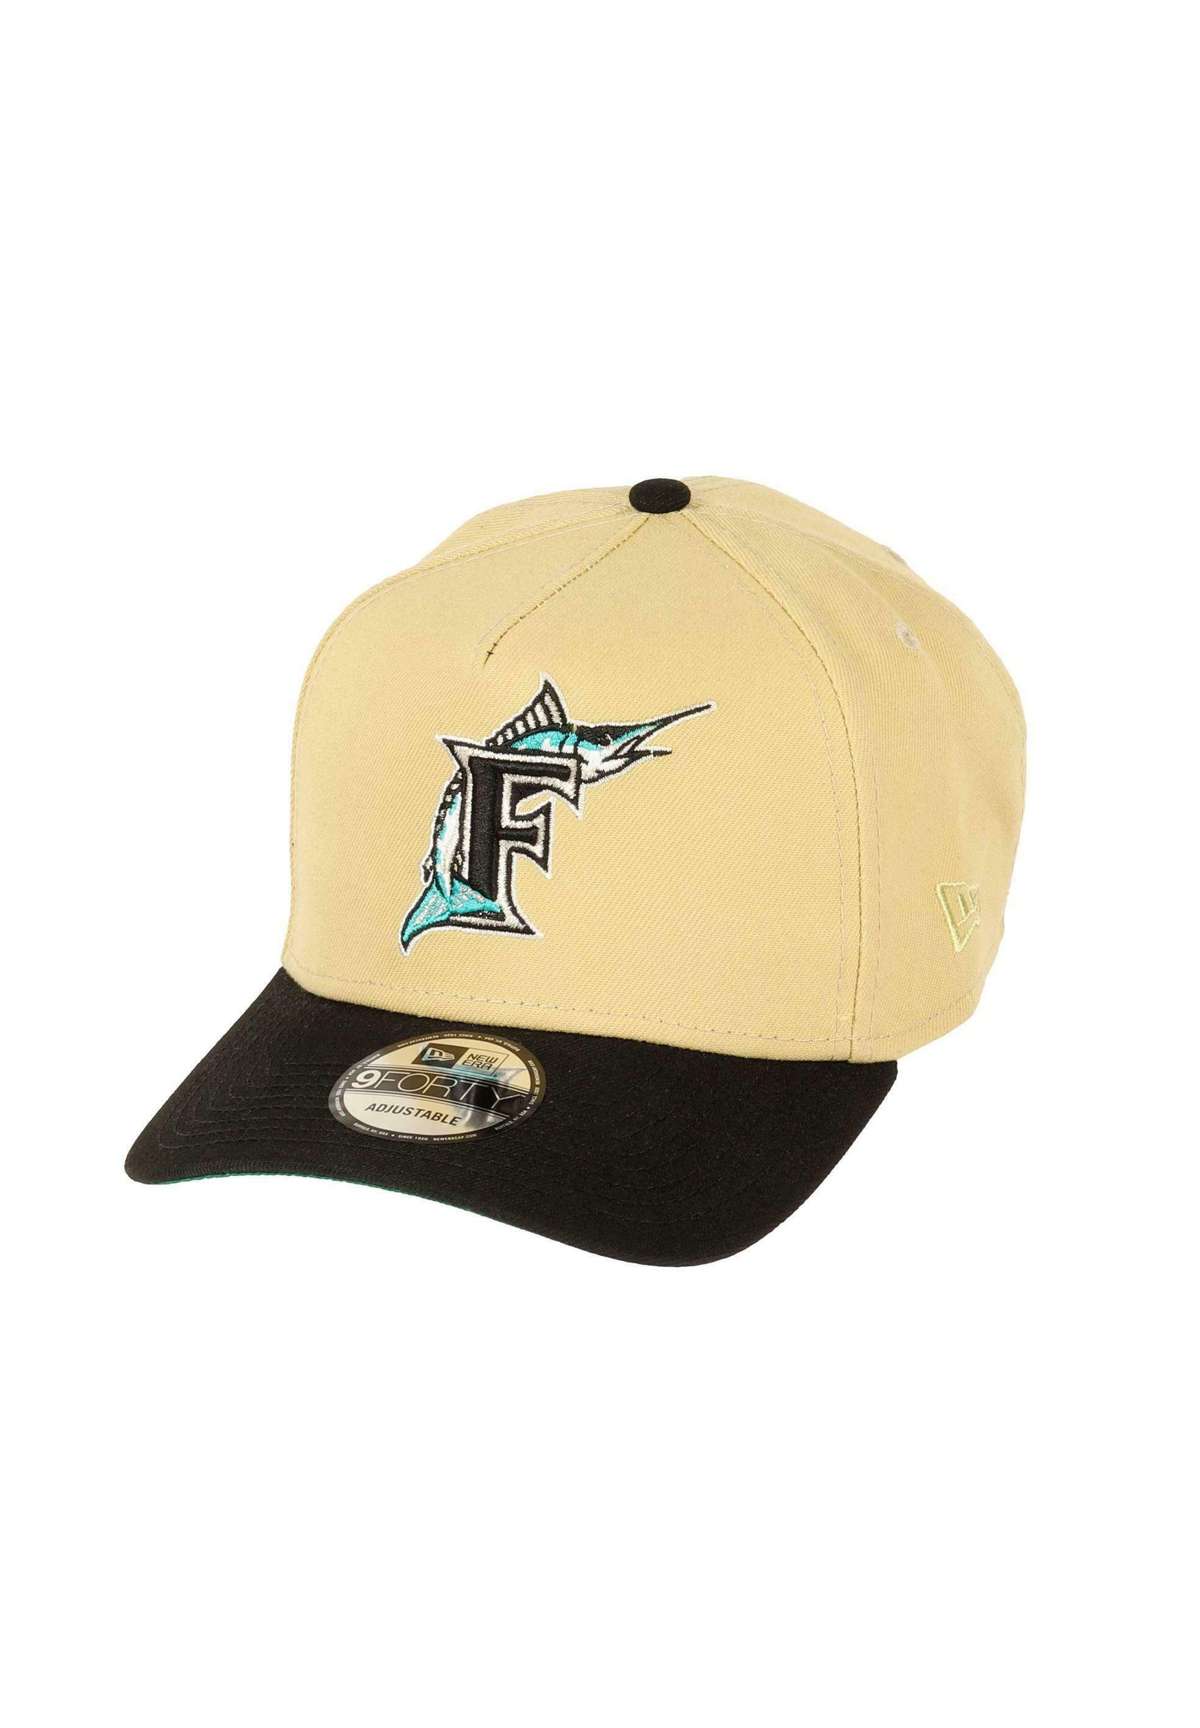 Кепка FLORIDA MARLINS ANNIVERSARYSIDEPATCH COOPERSTOWN A-FRAME SNAPBACK